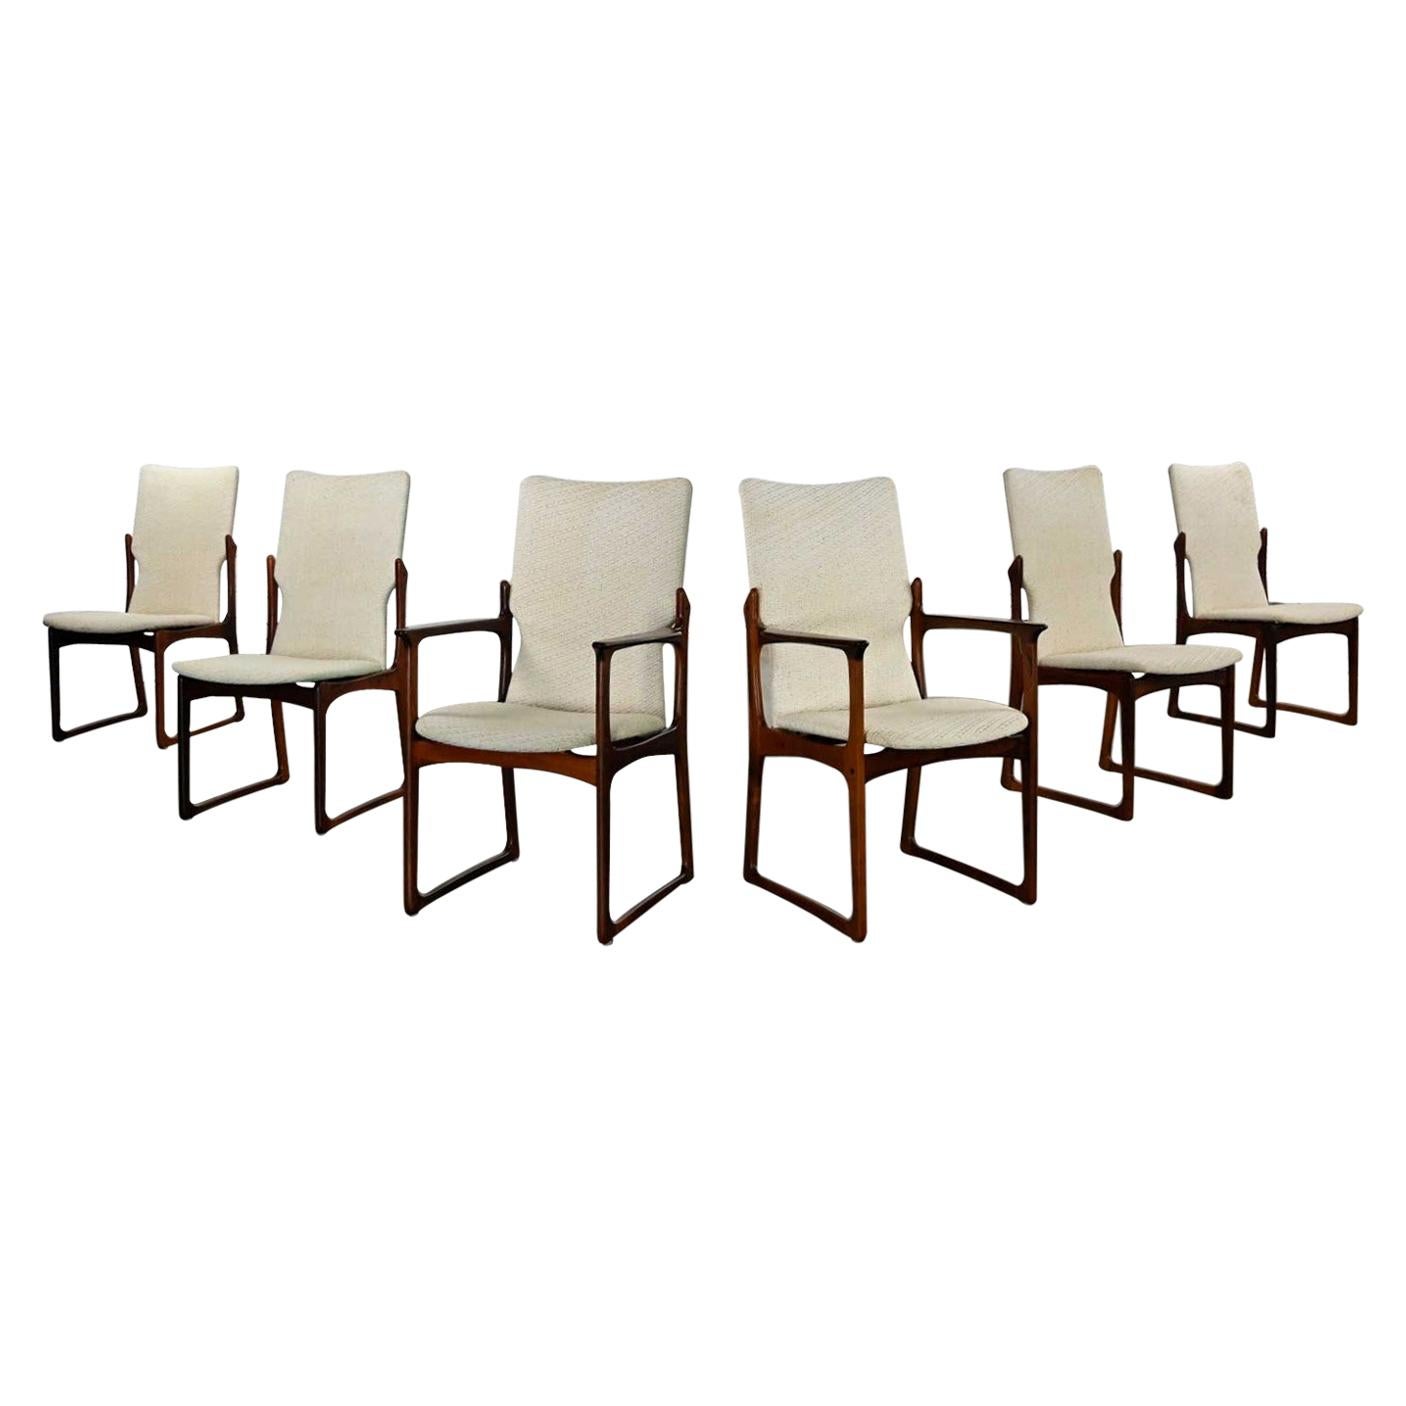 Scandinavian Modern Danish Rosewood Dining Chairs by Art Furn Set of 6 For Sale